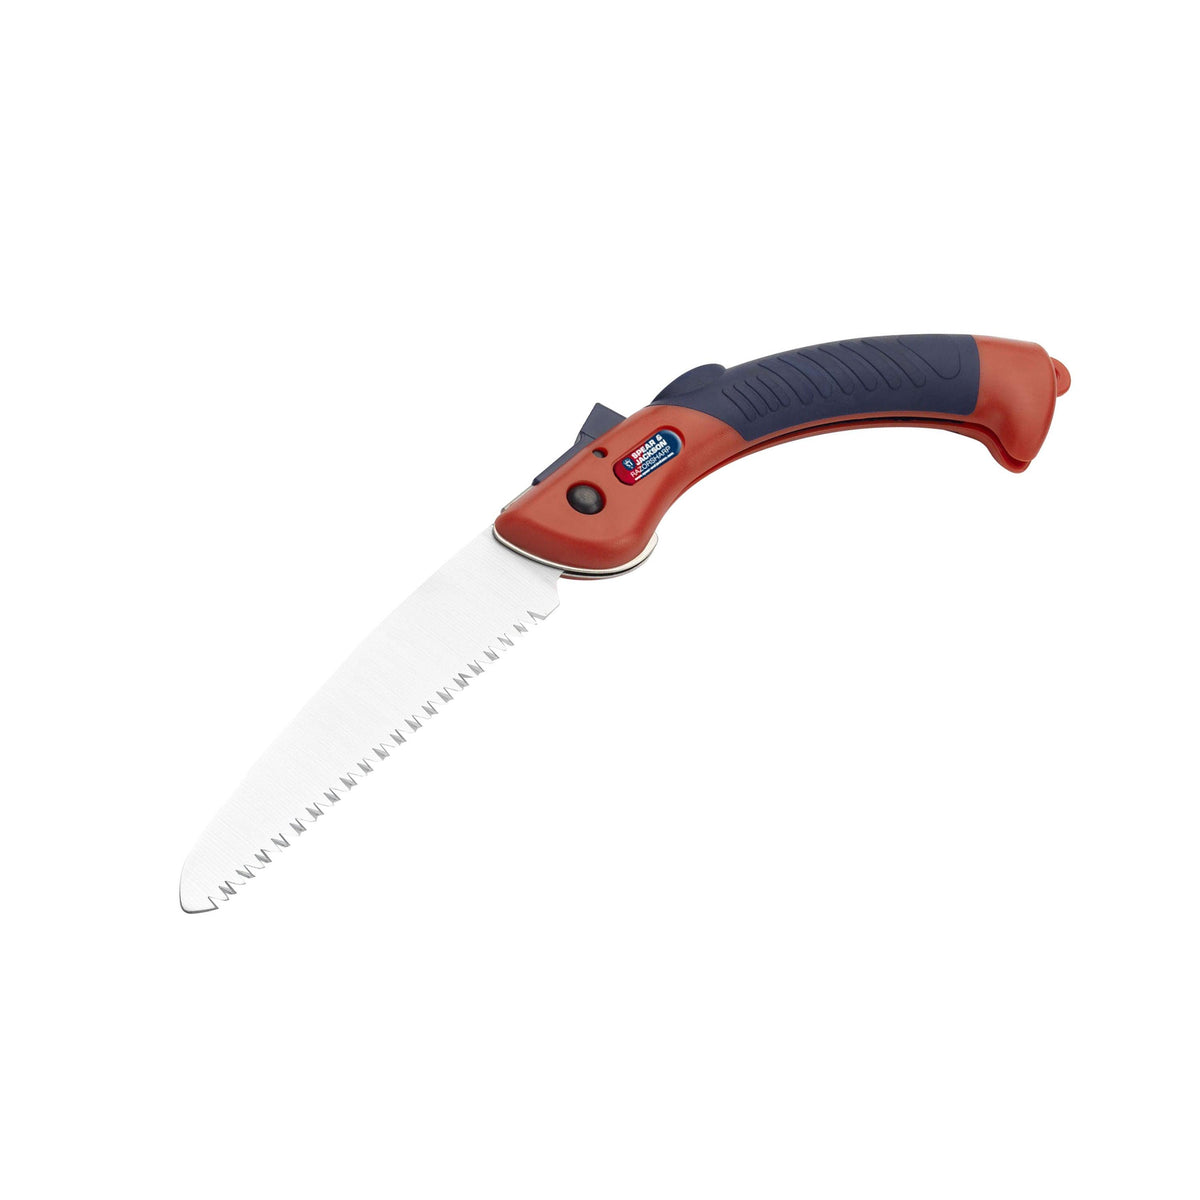 Spear &amp; Jackson Small Folding Pruning Saw